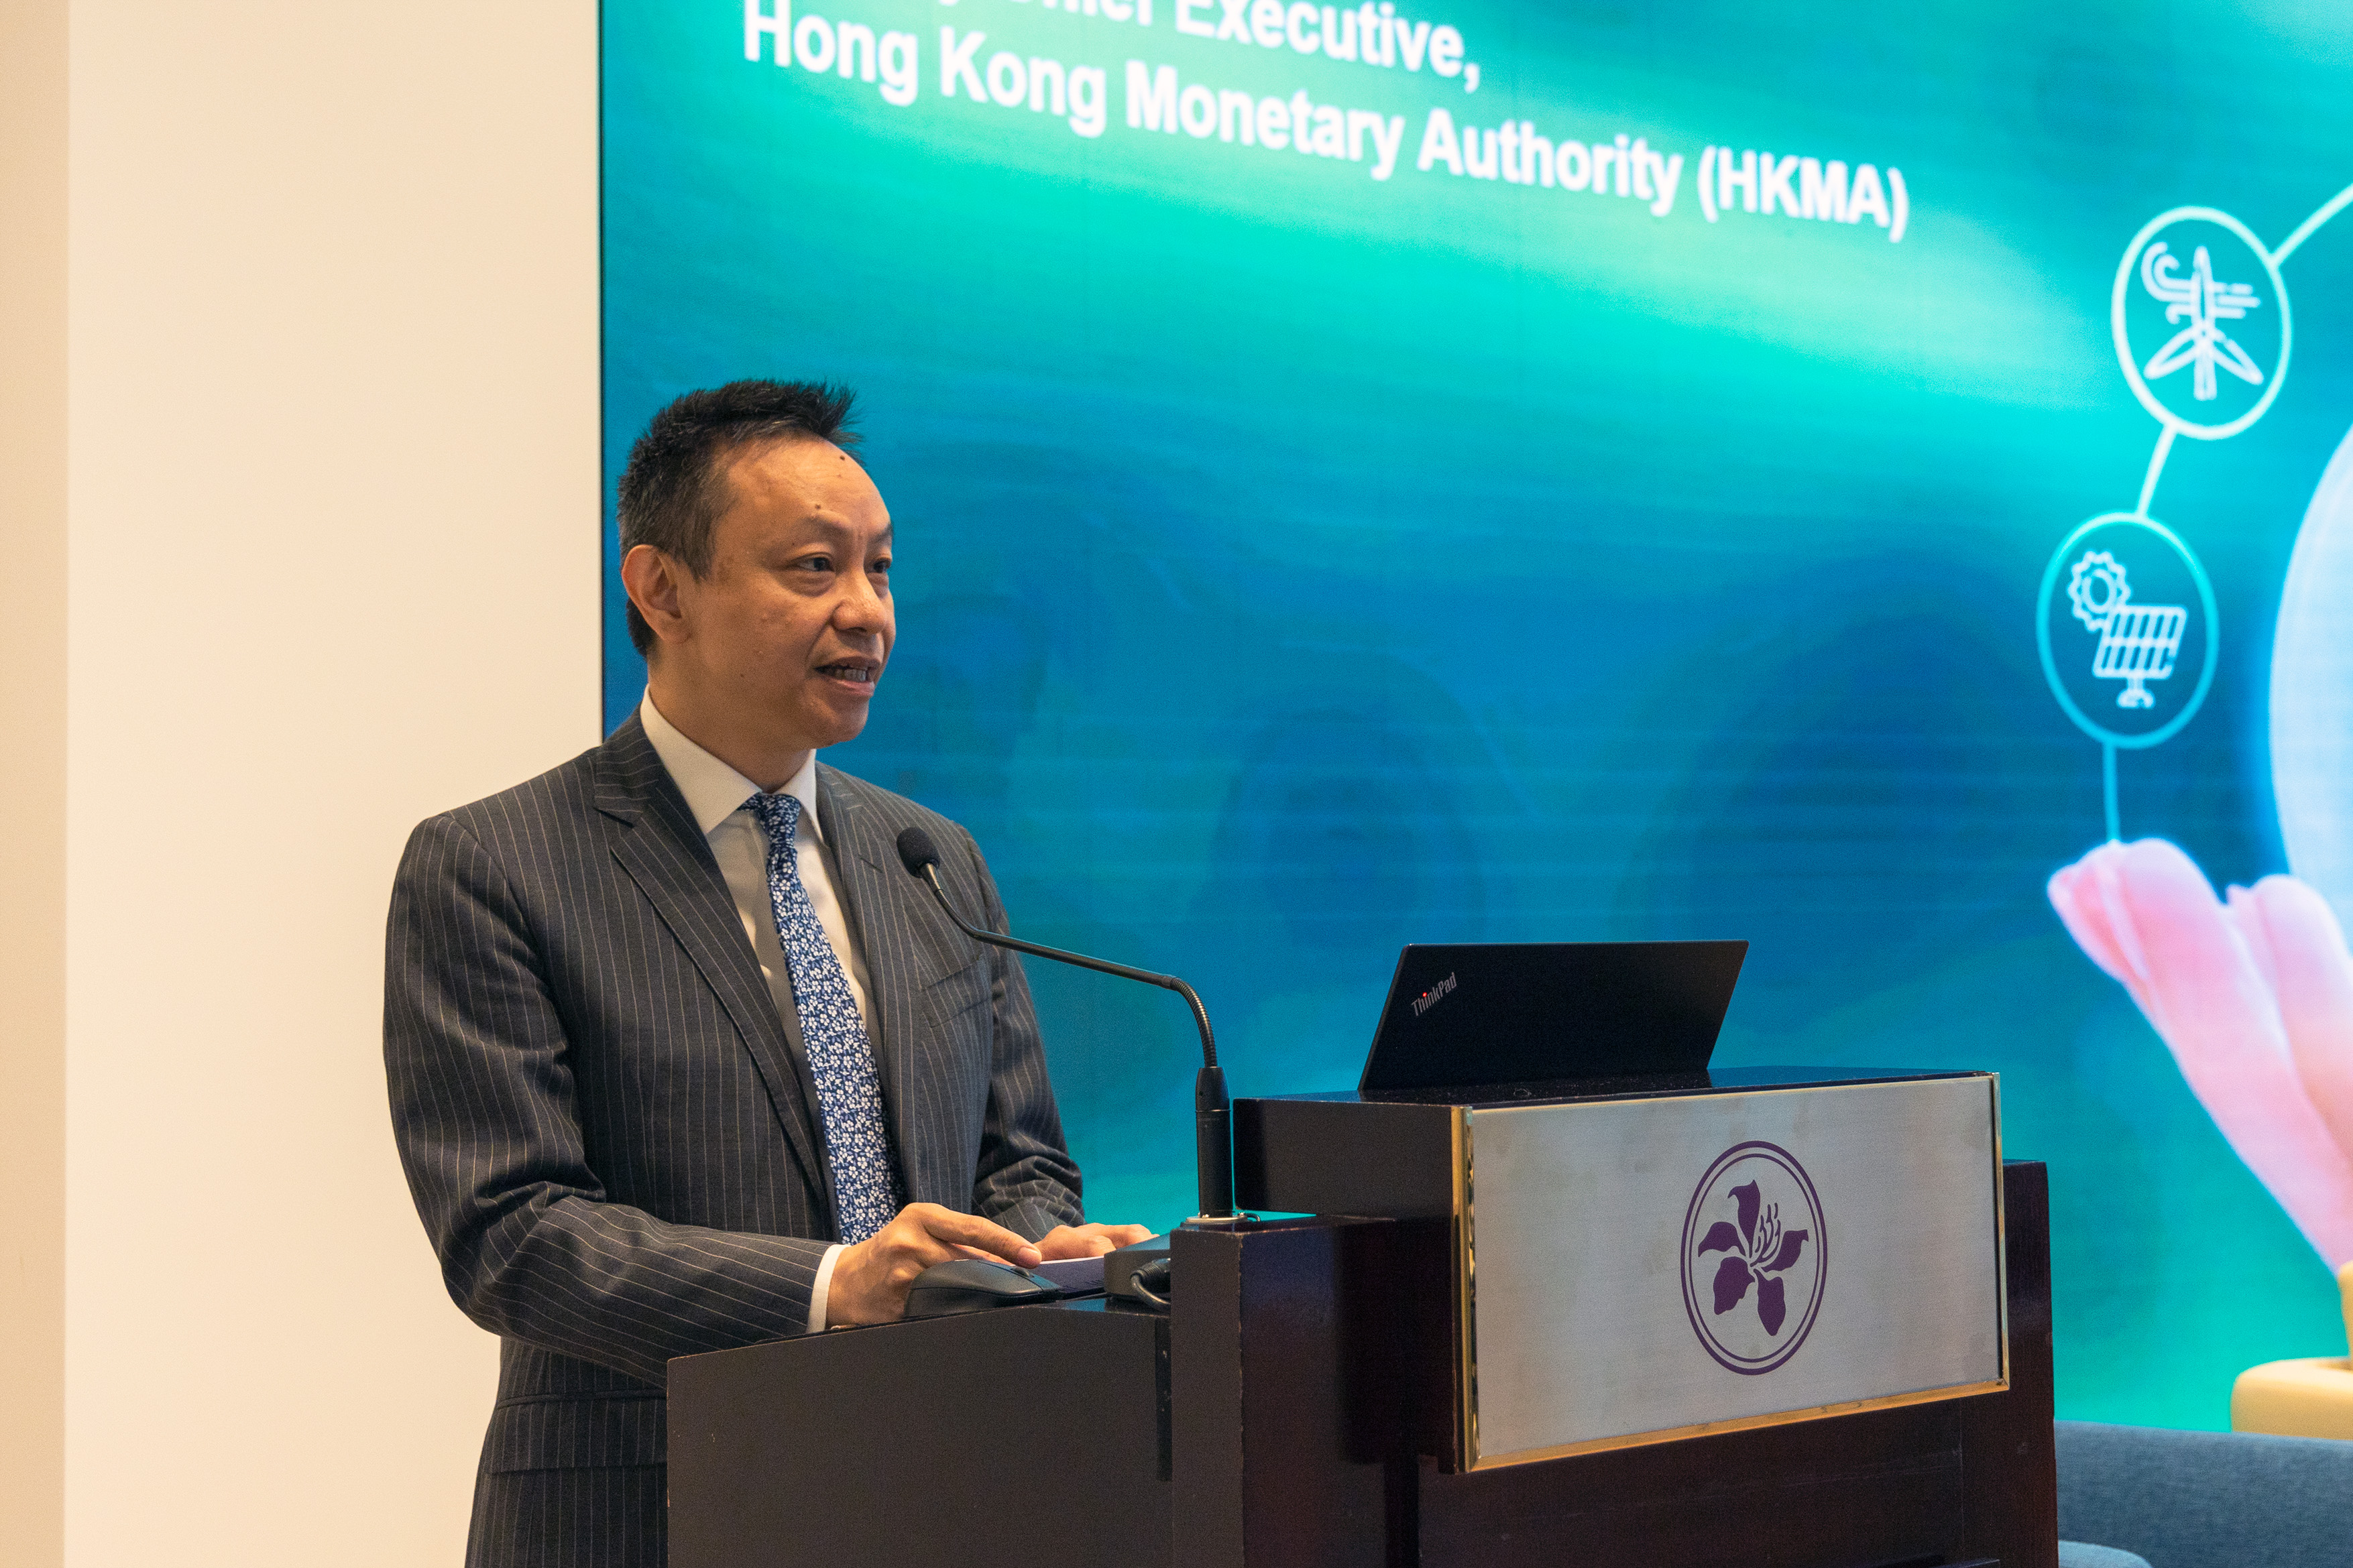 Deputy Chief Executive of the HKMA, Mr Darryl Chan, gives welcome remarks at the seminar.